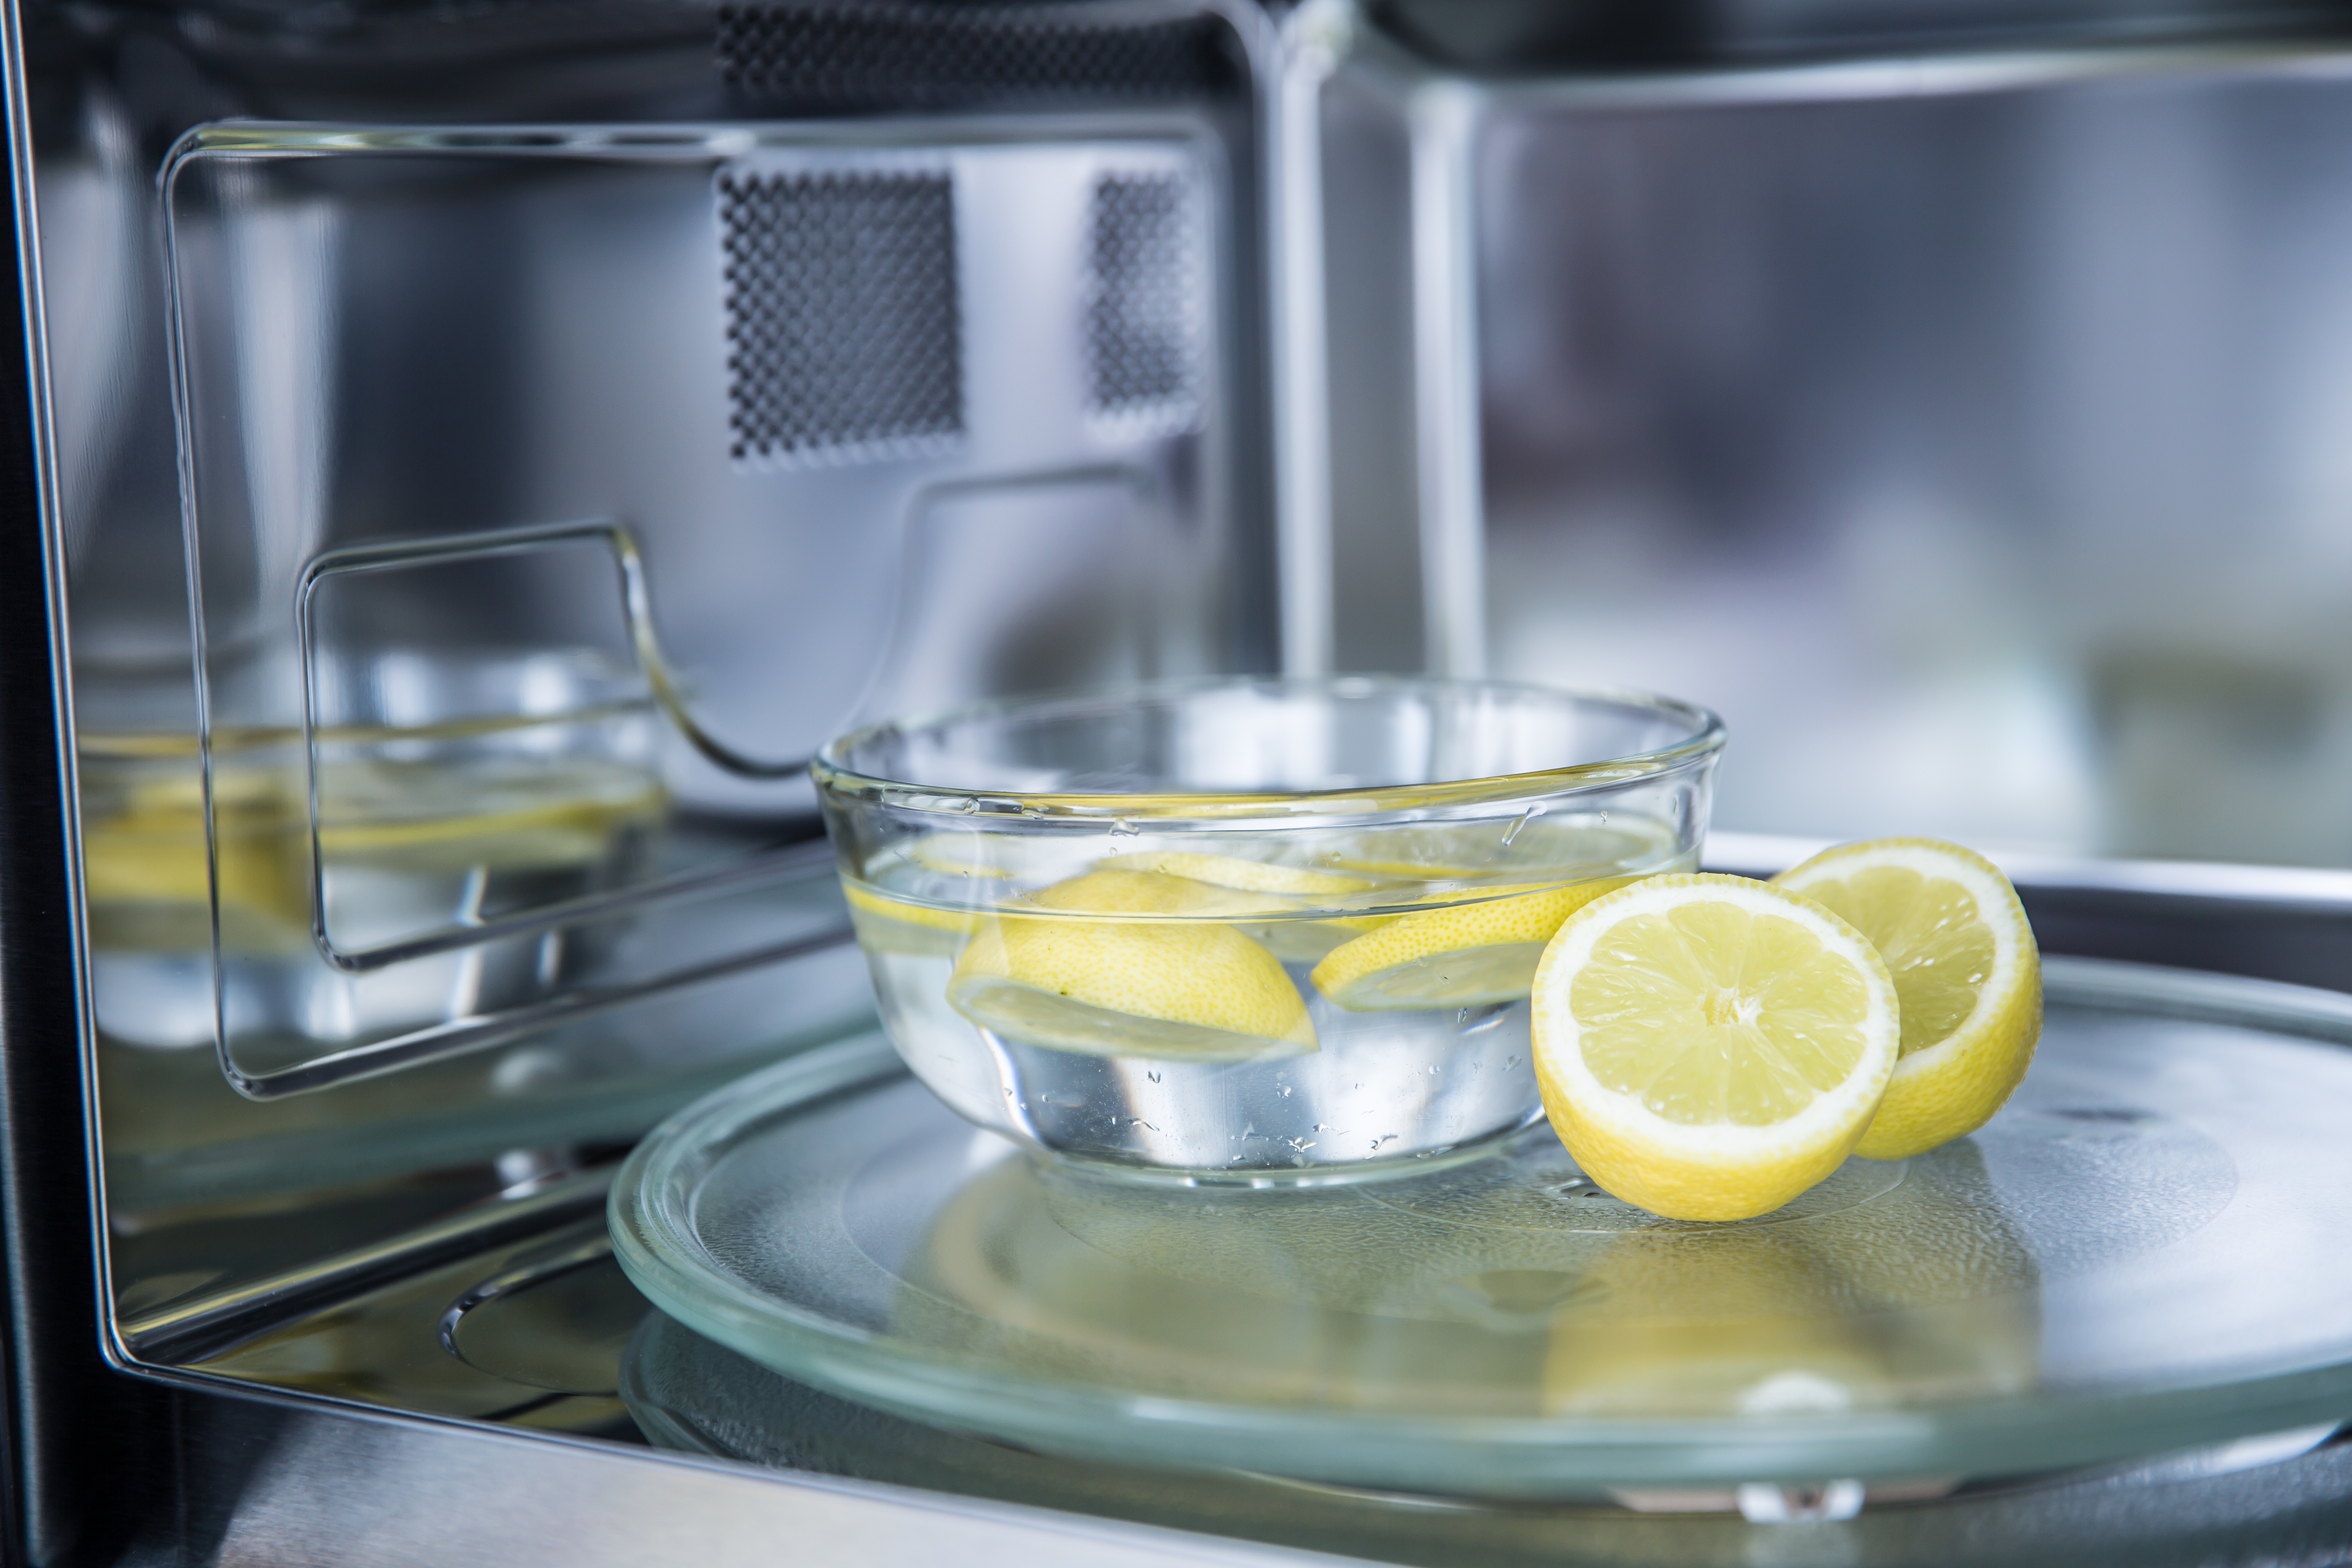 Bowl of water with lemon slices inside a microwave, suggesting a cleaning hack